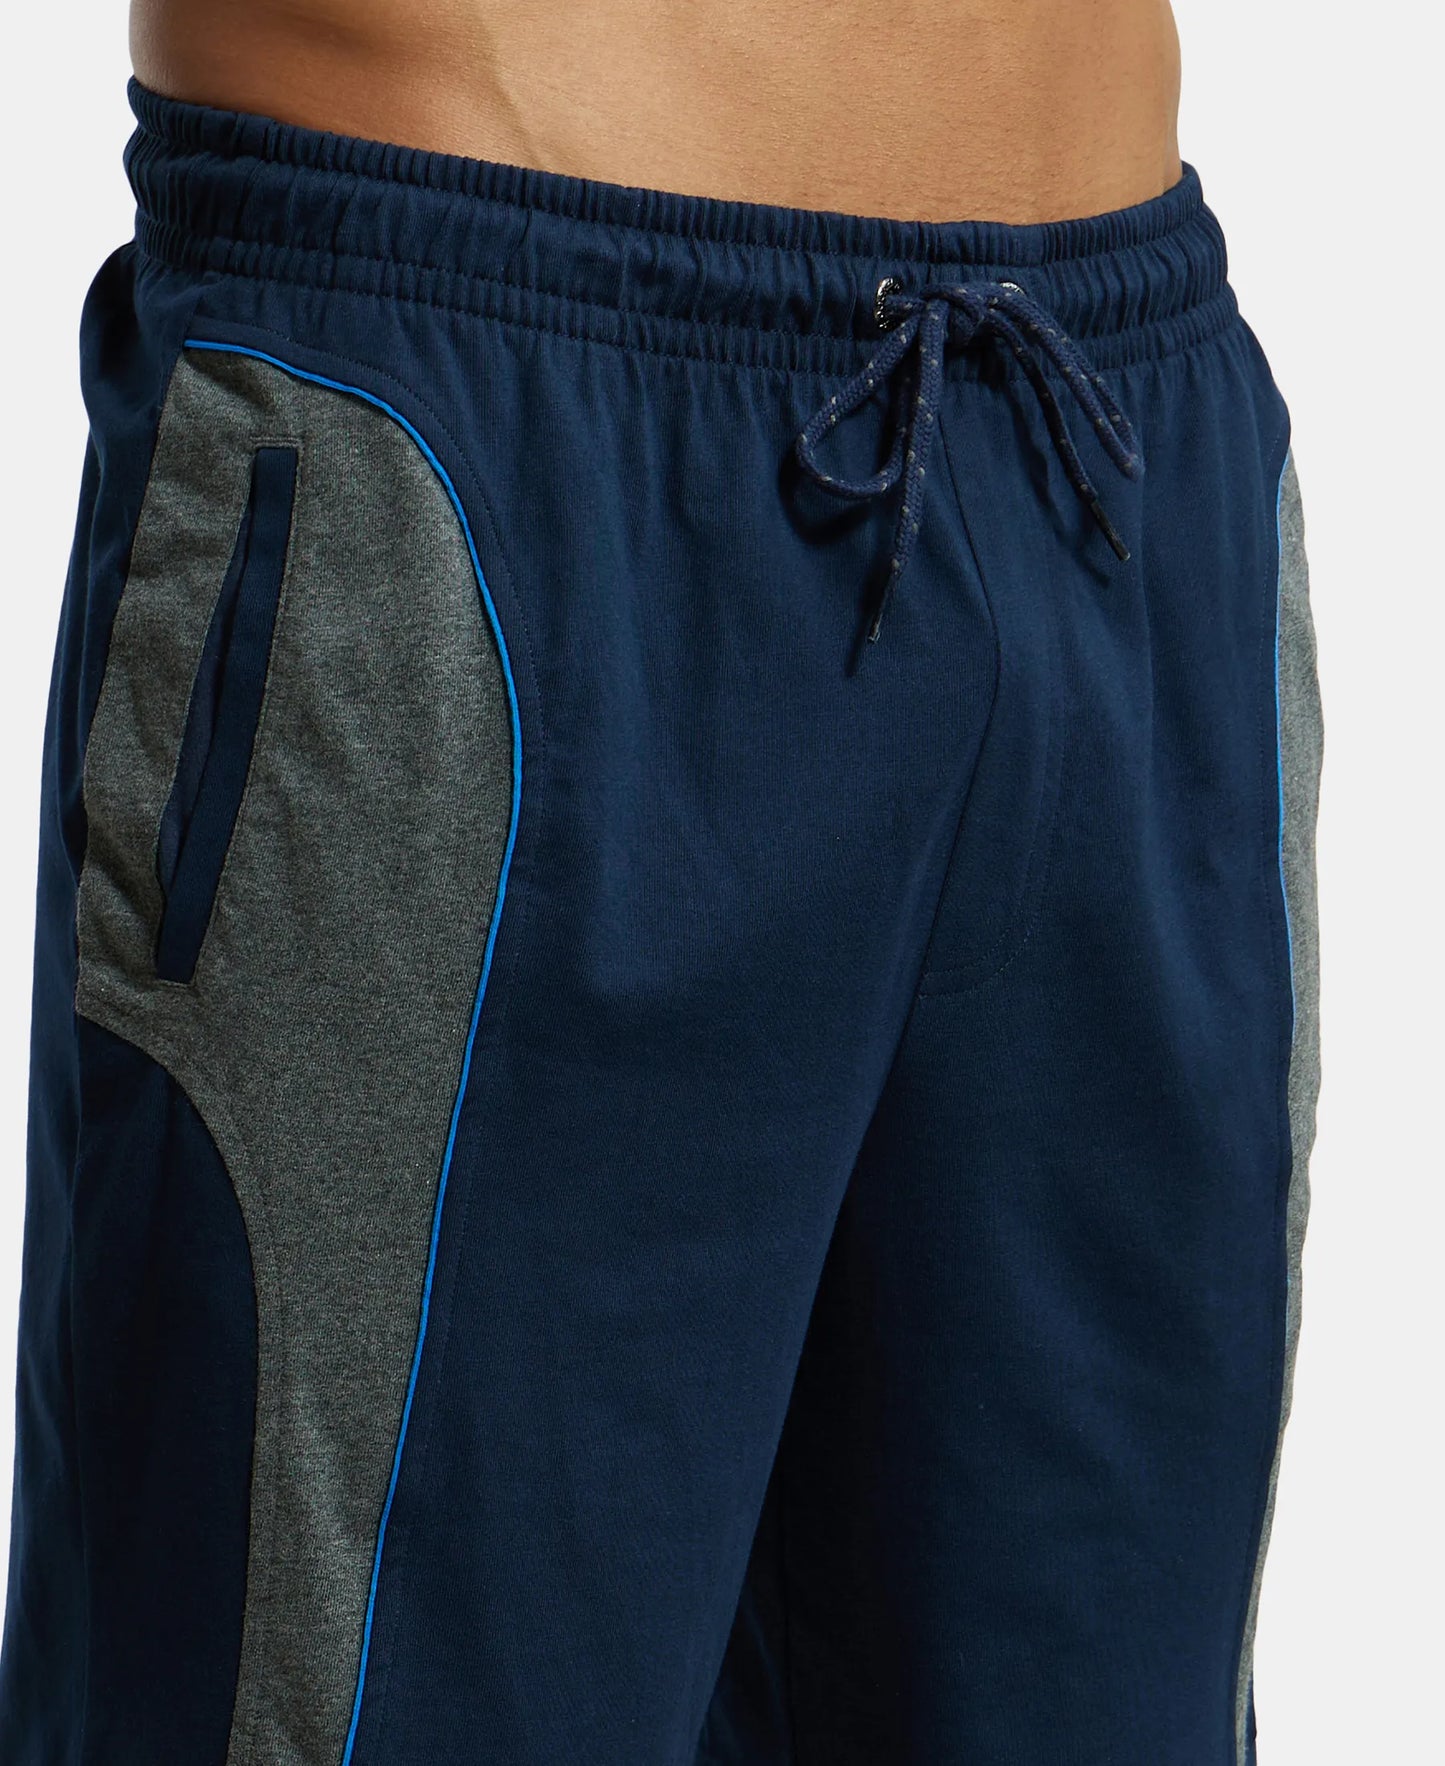 Super Combed Cotton Rich Straight Fit Shorts with Side Pockets - Navy & Charcoal Melange-7